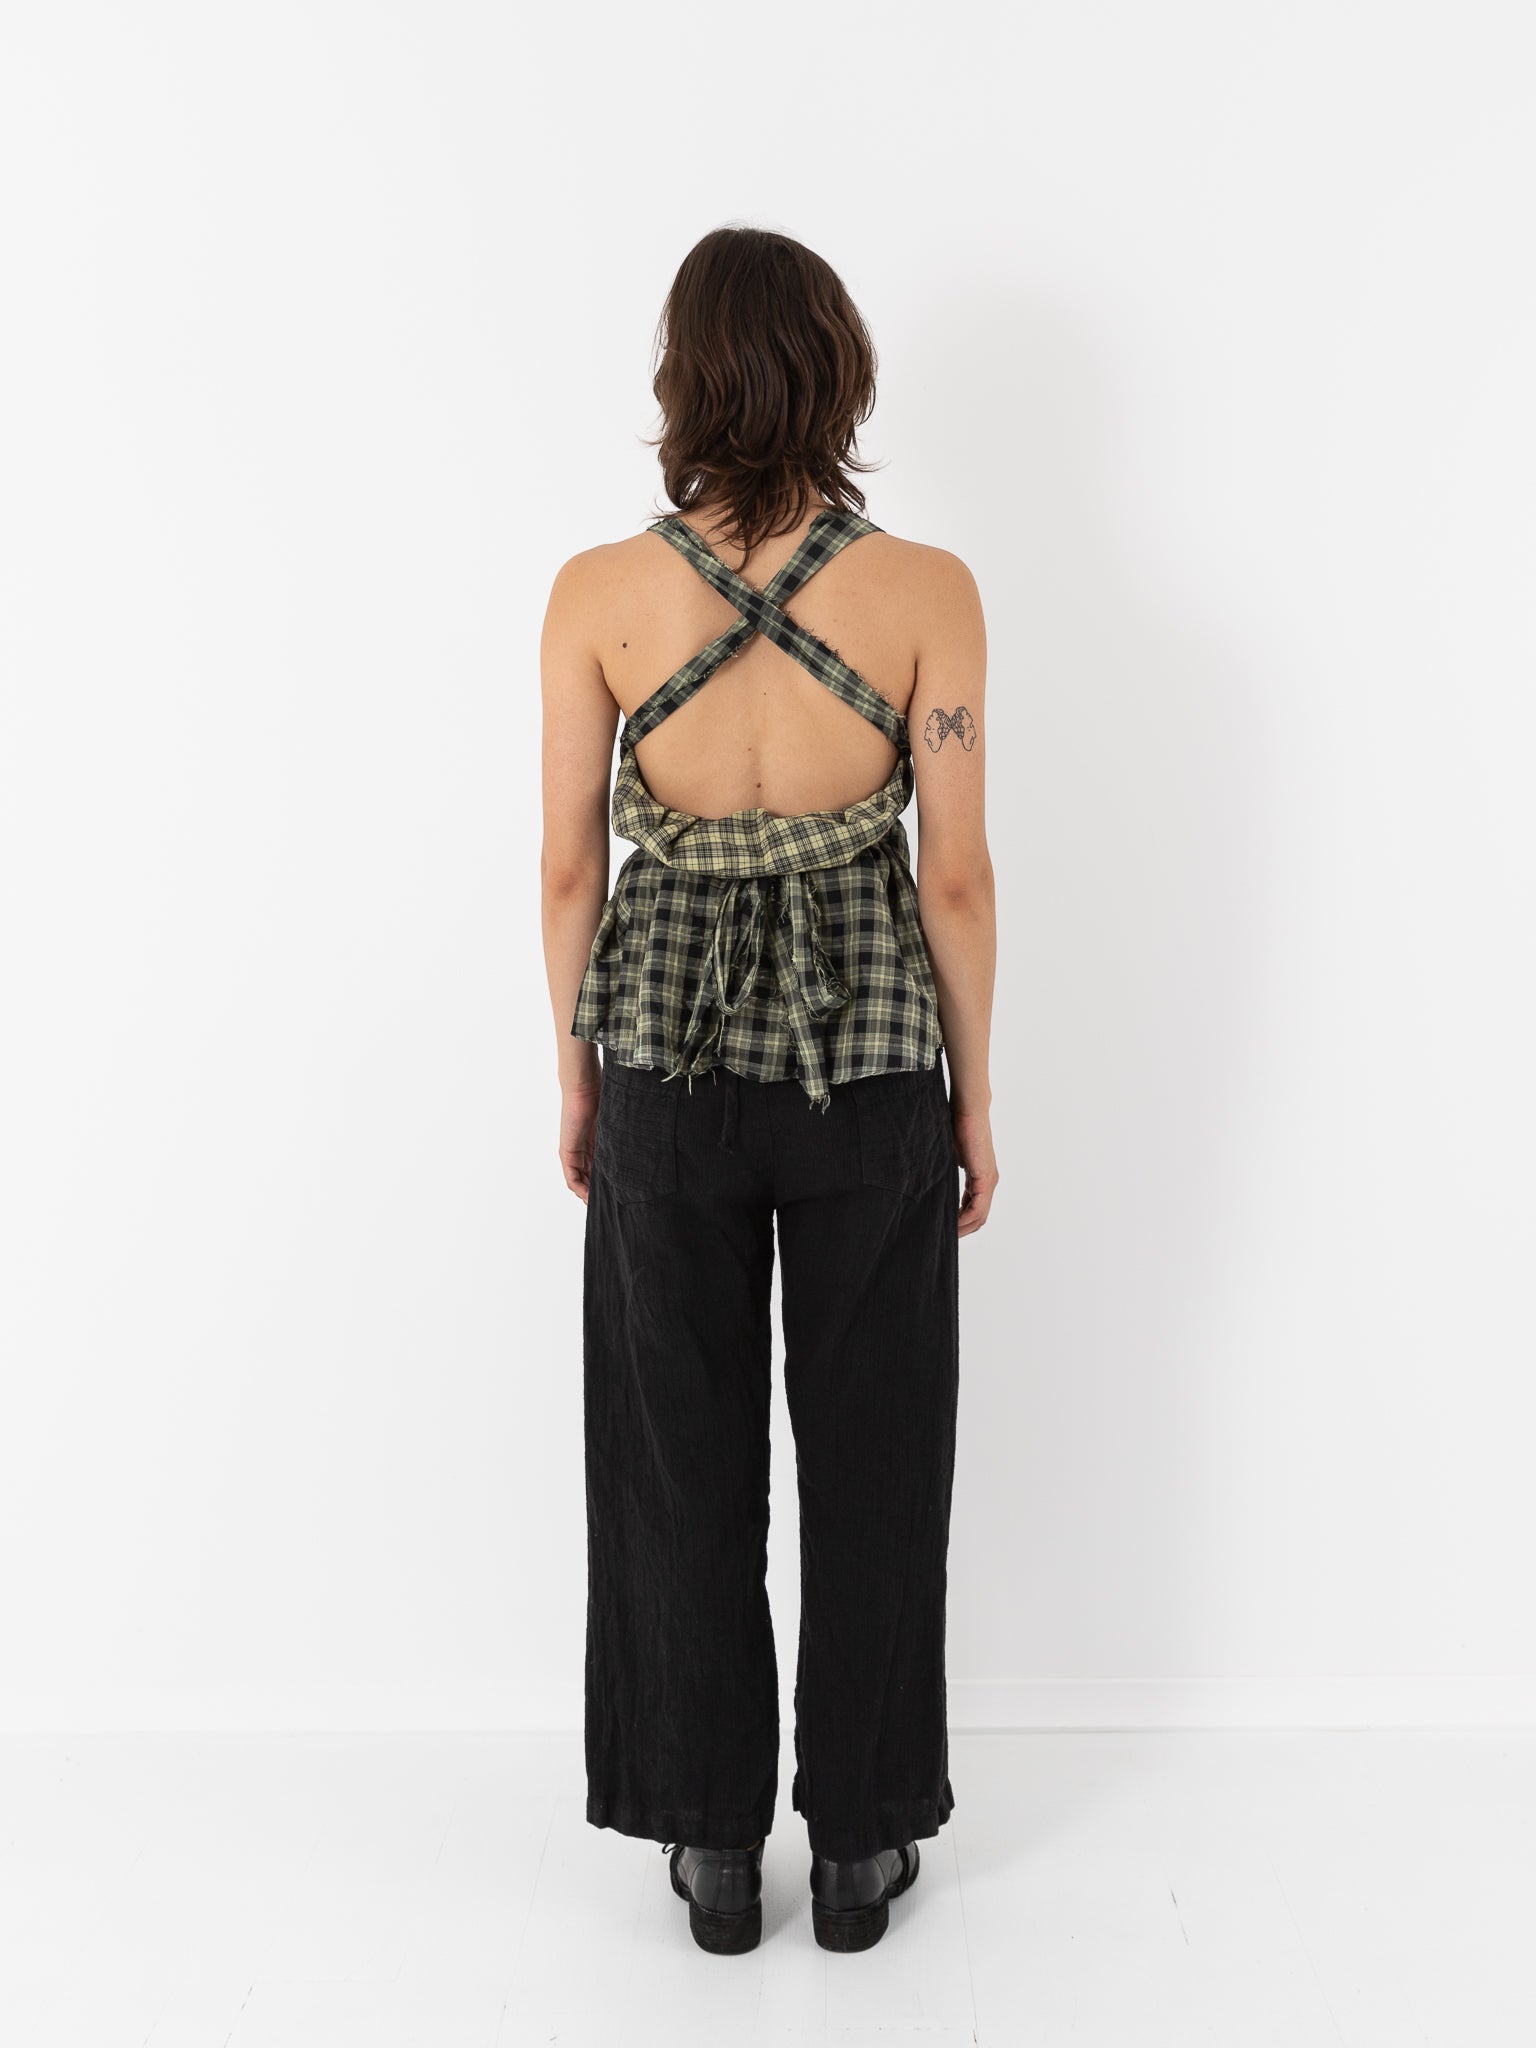 Atelier Suppan Check Strap Top - Worthwhile